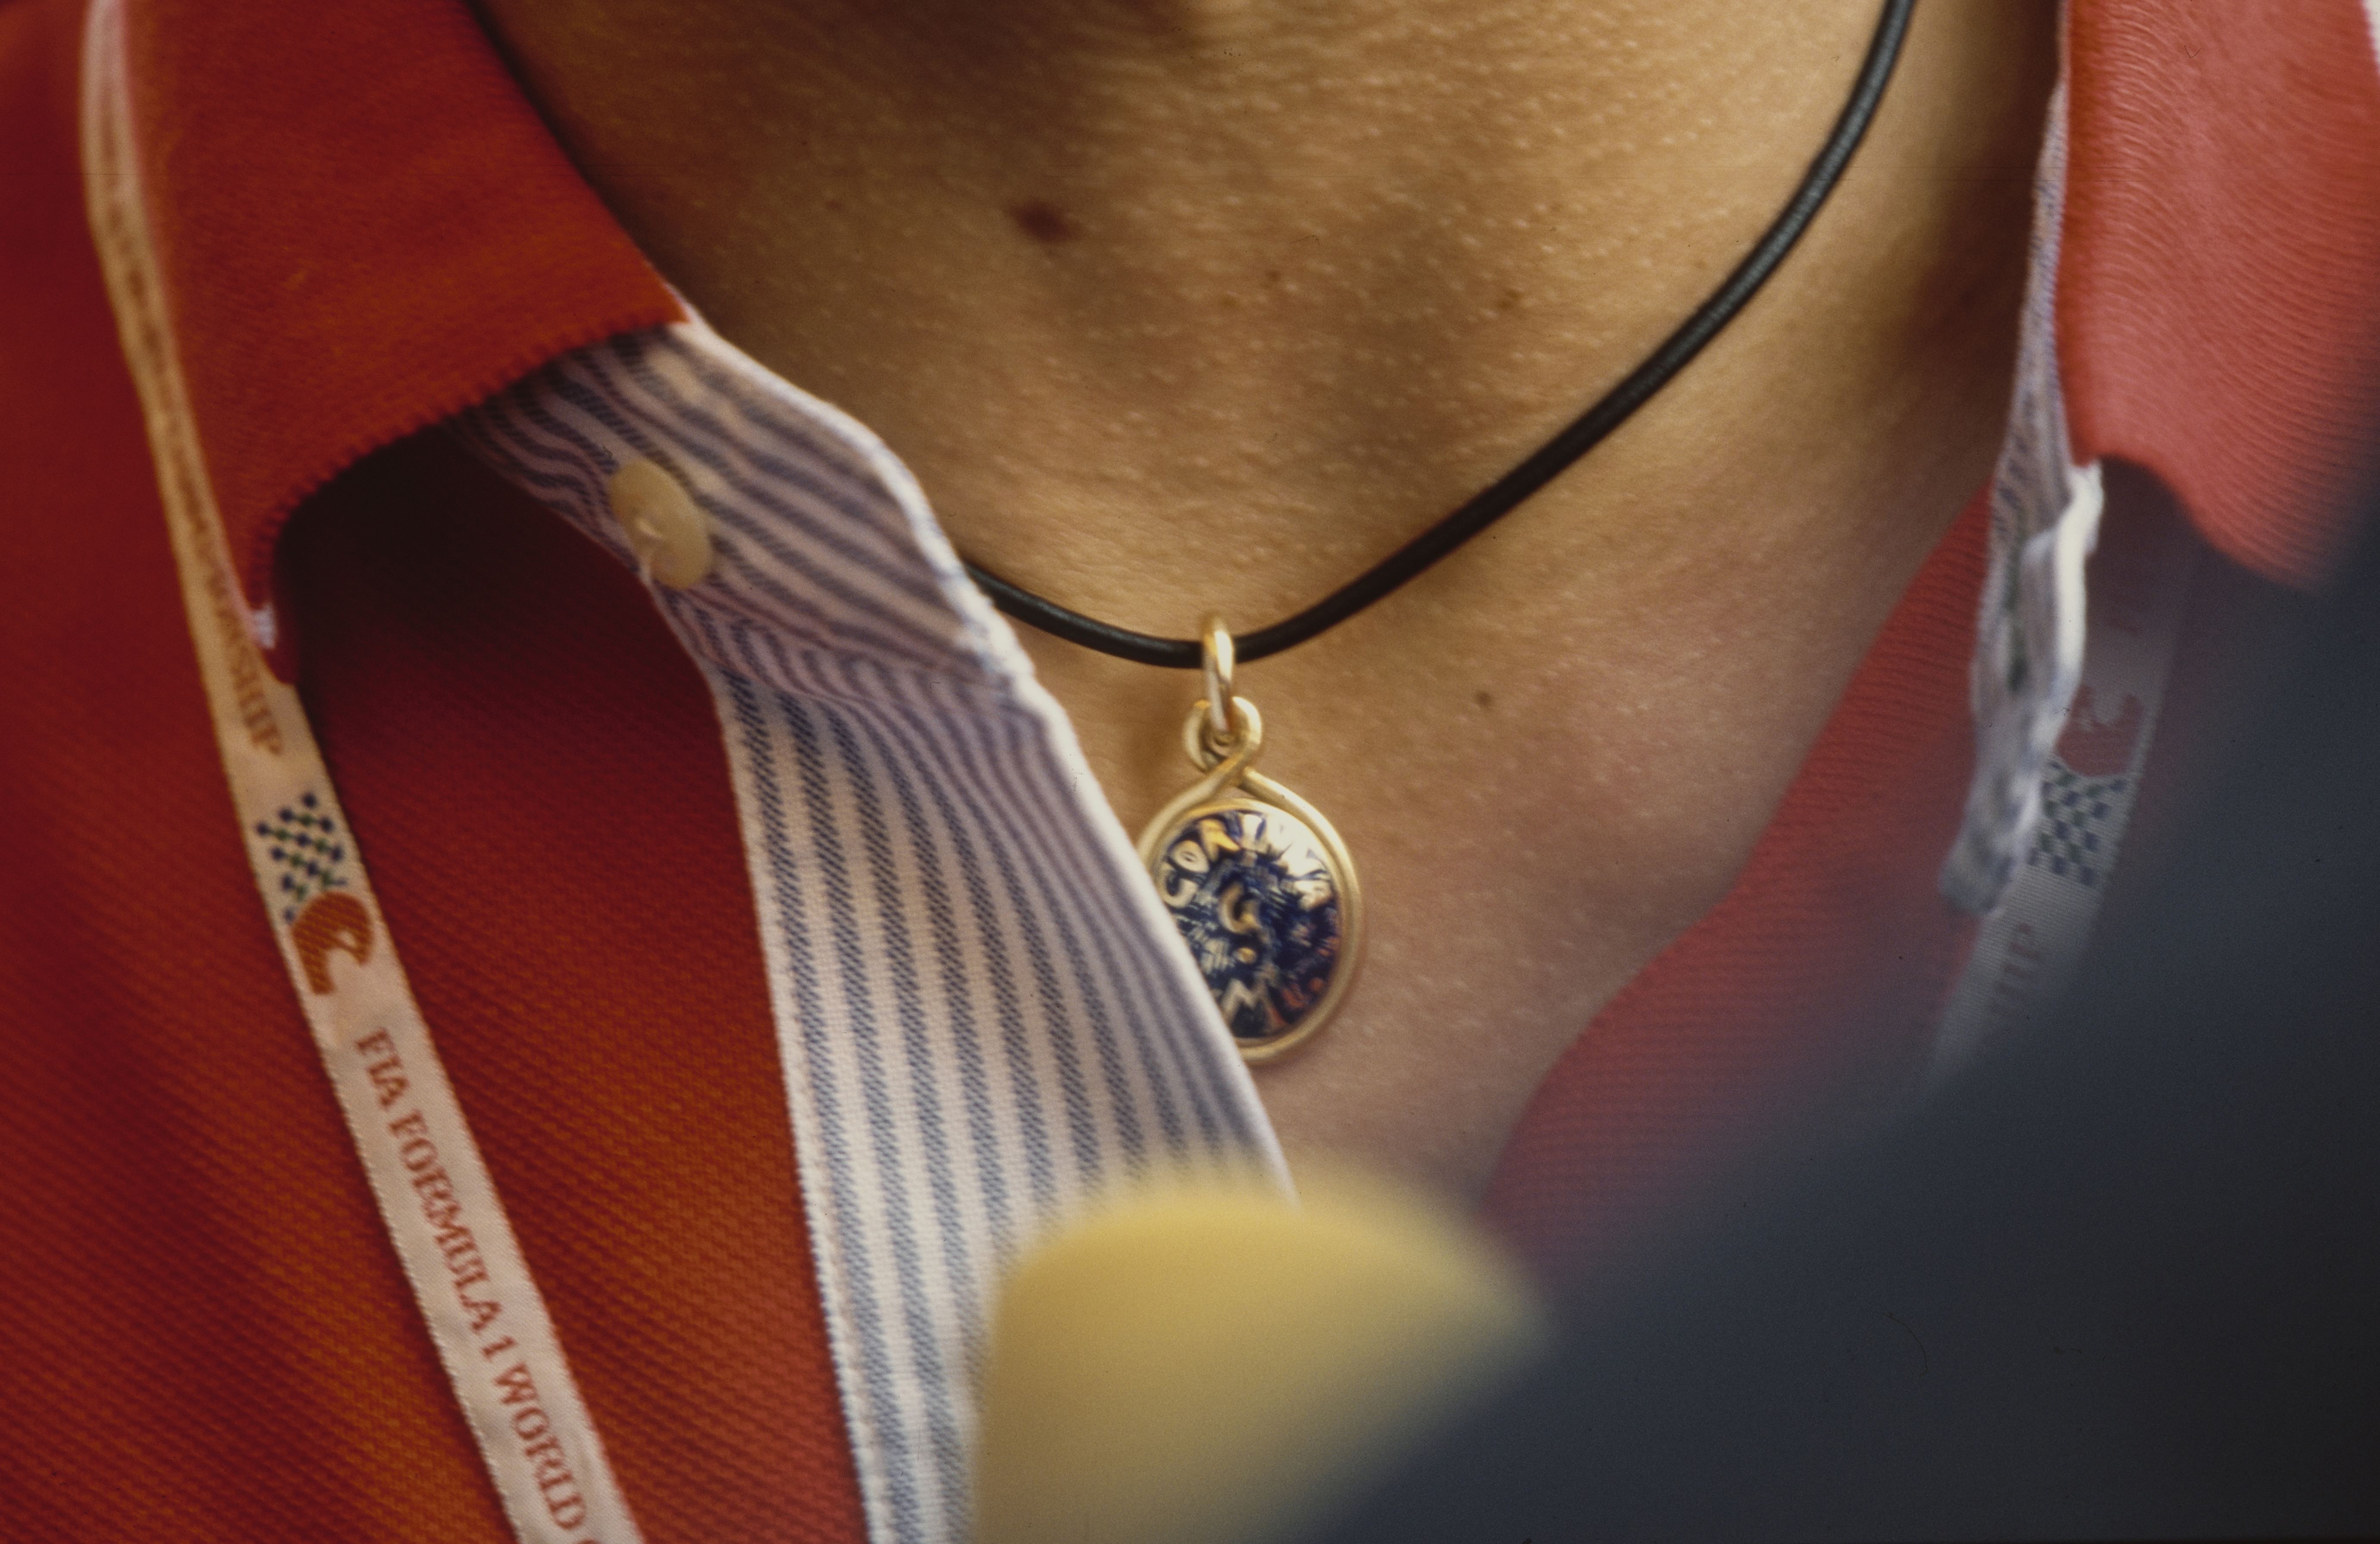 Close-up view of the pendant bearing the name of his wife, Corinna Schumacher, worn by German racing driver Michael Schumacher ahead of the German Grand Prix, held at Hockenheimring, in Hockenheim, Baden-Wurttemberg, Germany, August 2, 1998. | Source: Getty Images